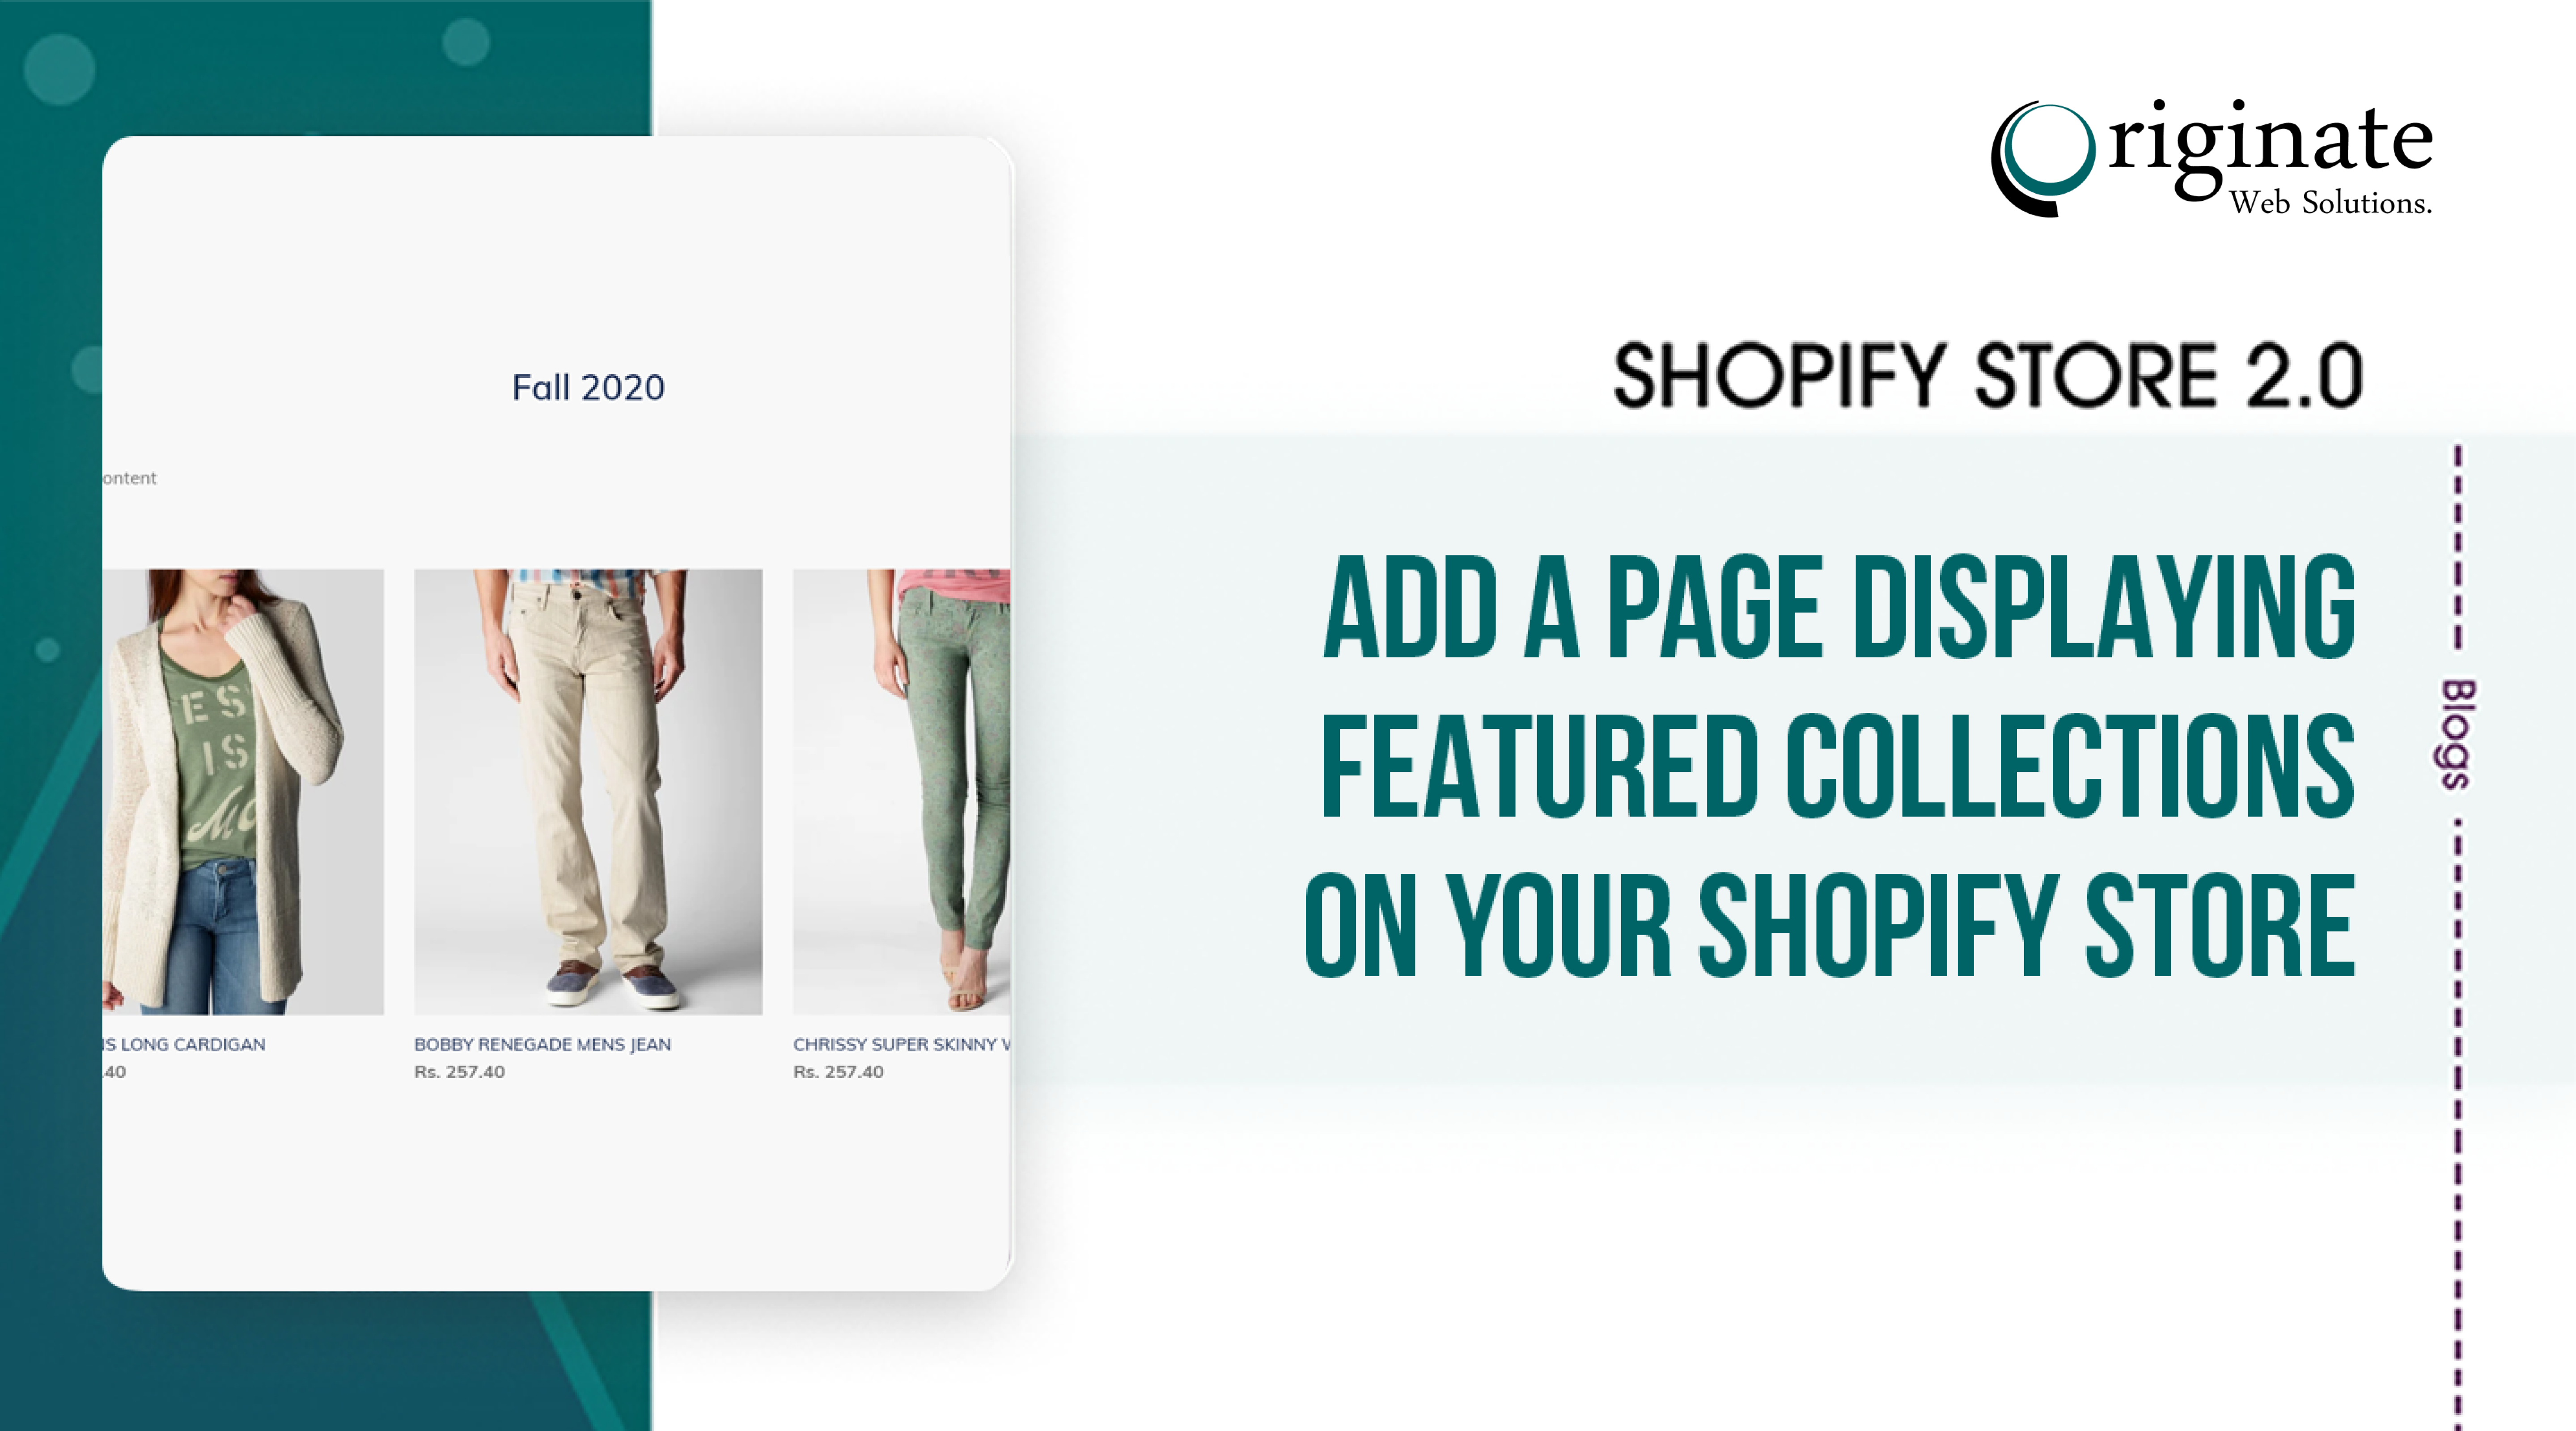 Add a page Displaying Featured Collections on your Shopify store